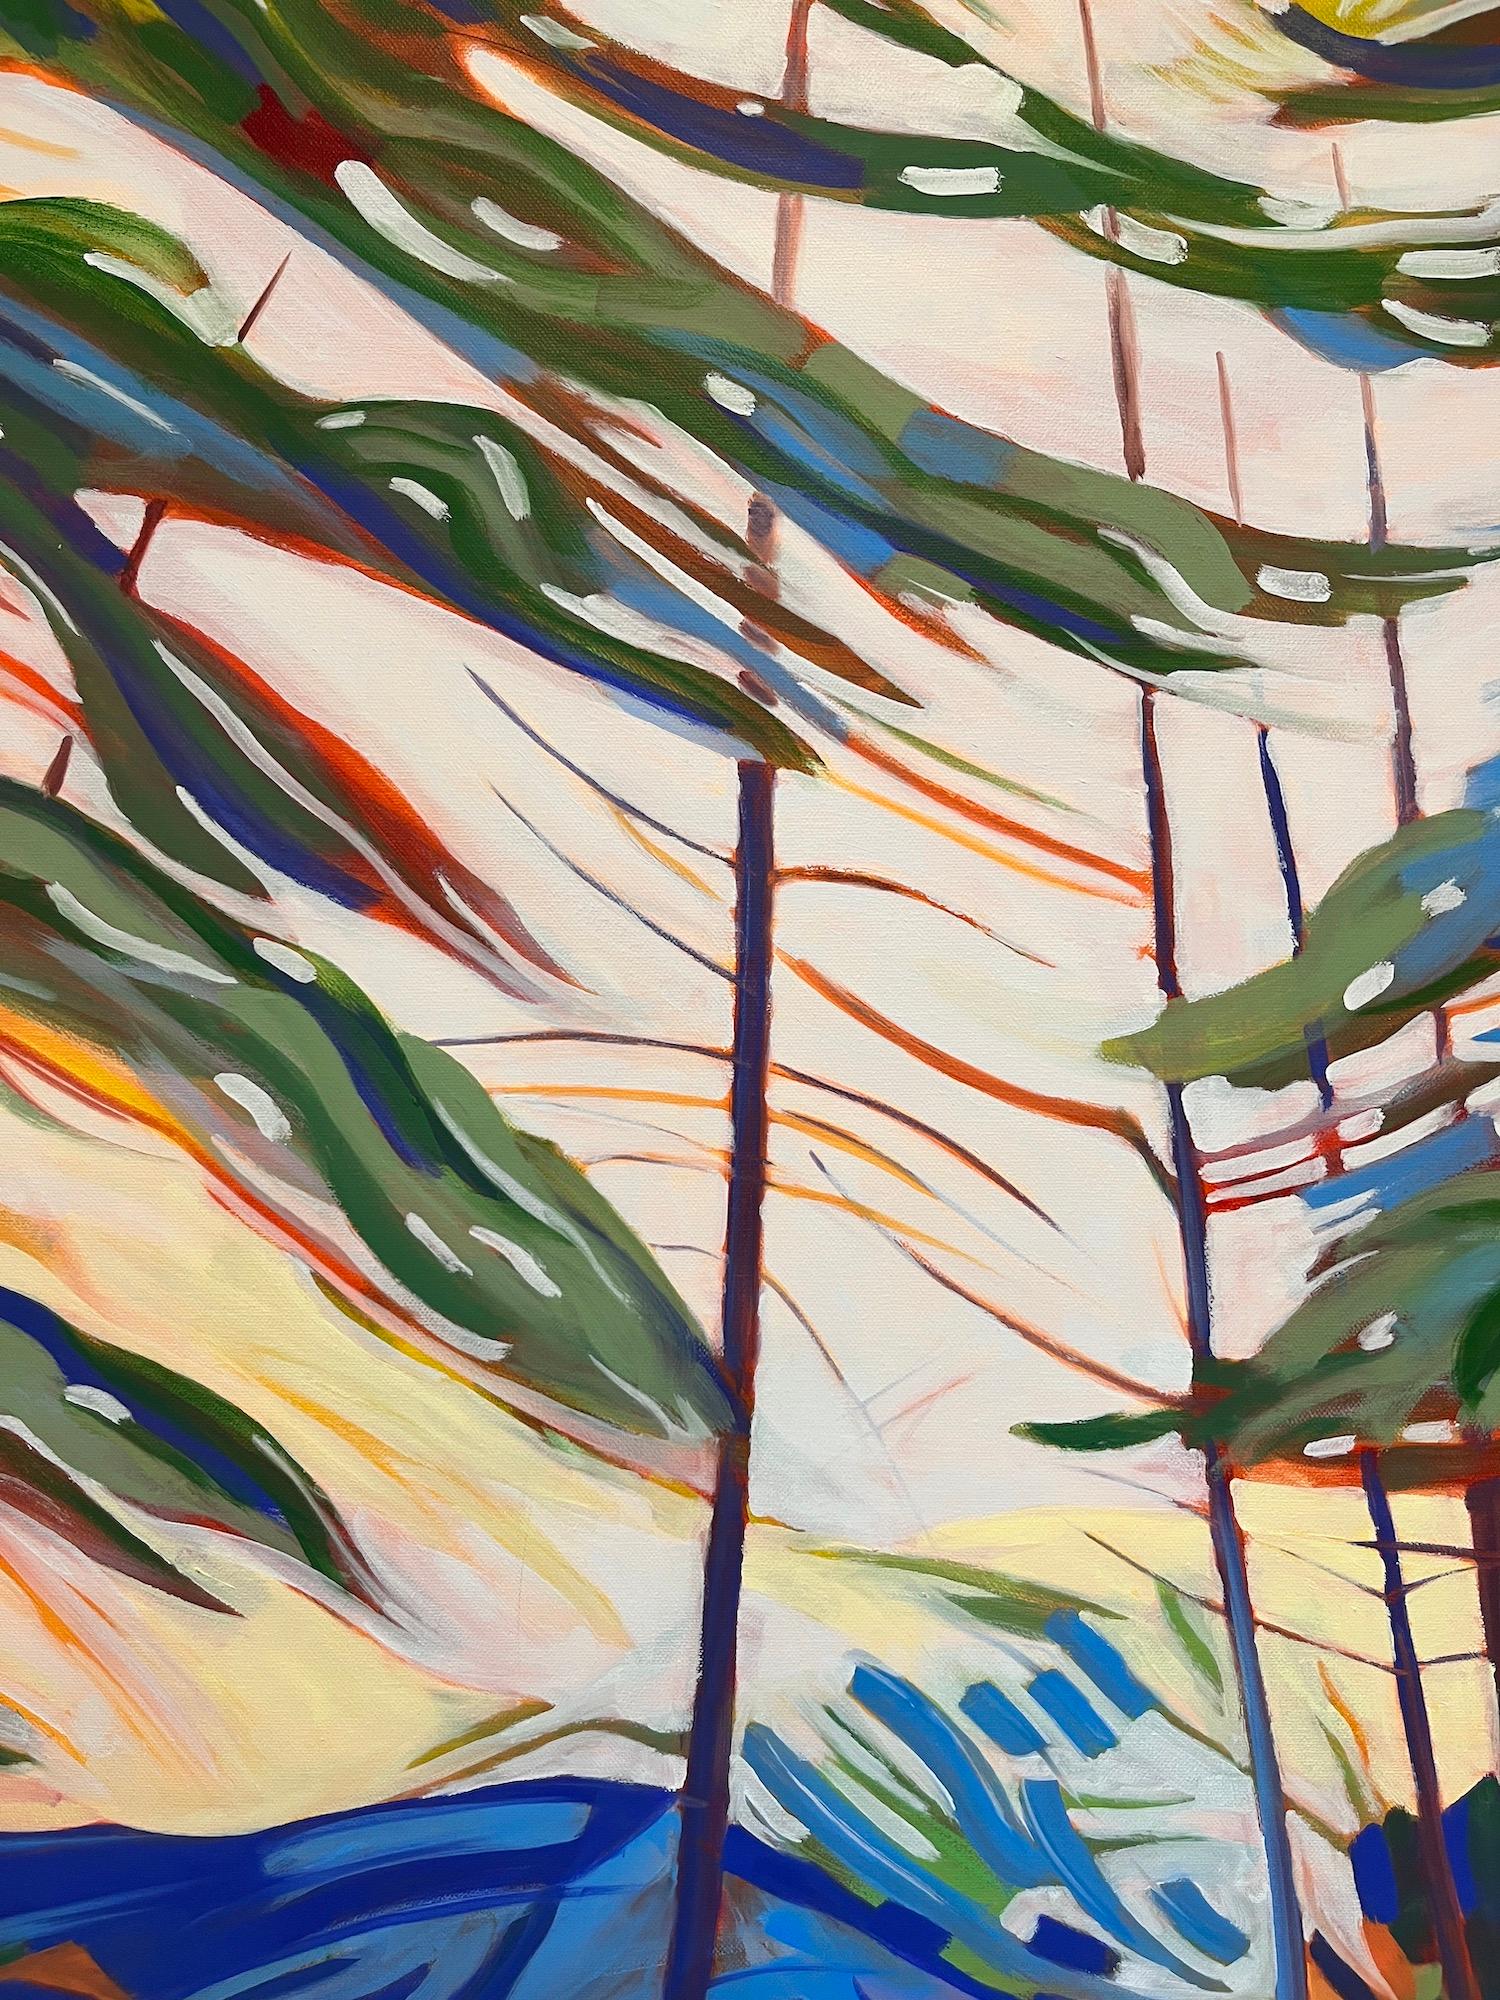 In “Ventoso,” Marcia Wise’s 30 x 40 inch oil on linen painting, we are swept into a windstorm of predominant blues and reds as they move with the wind in a milky yellow and pink sky, waving limbs speckled in earth tones of oranges, reds, greens.